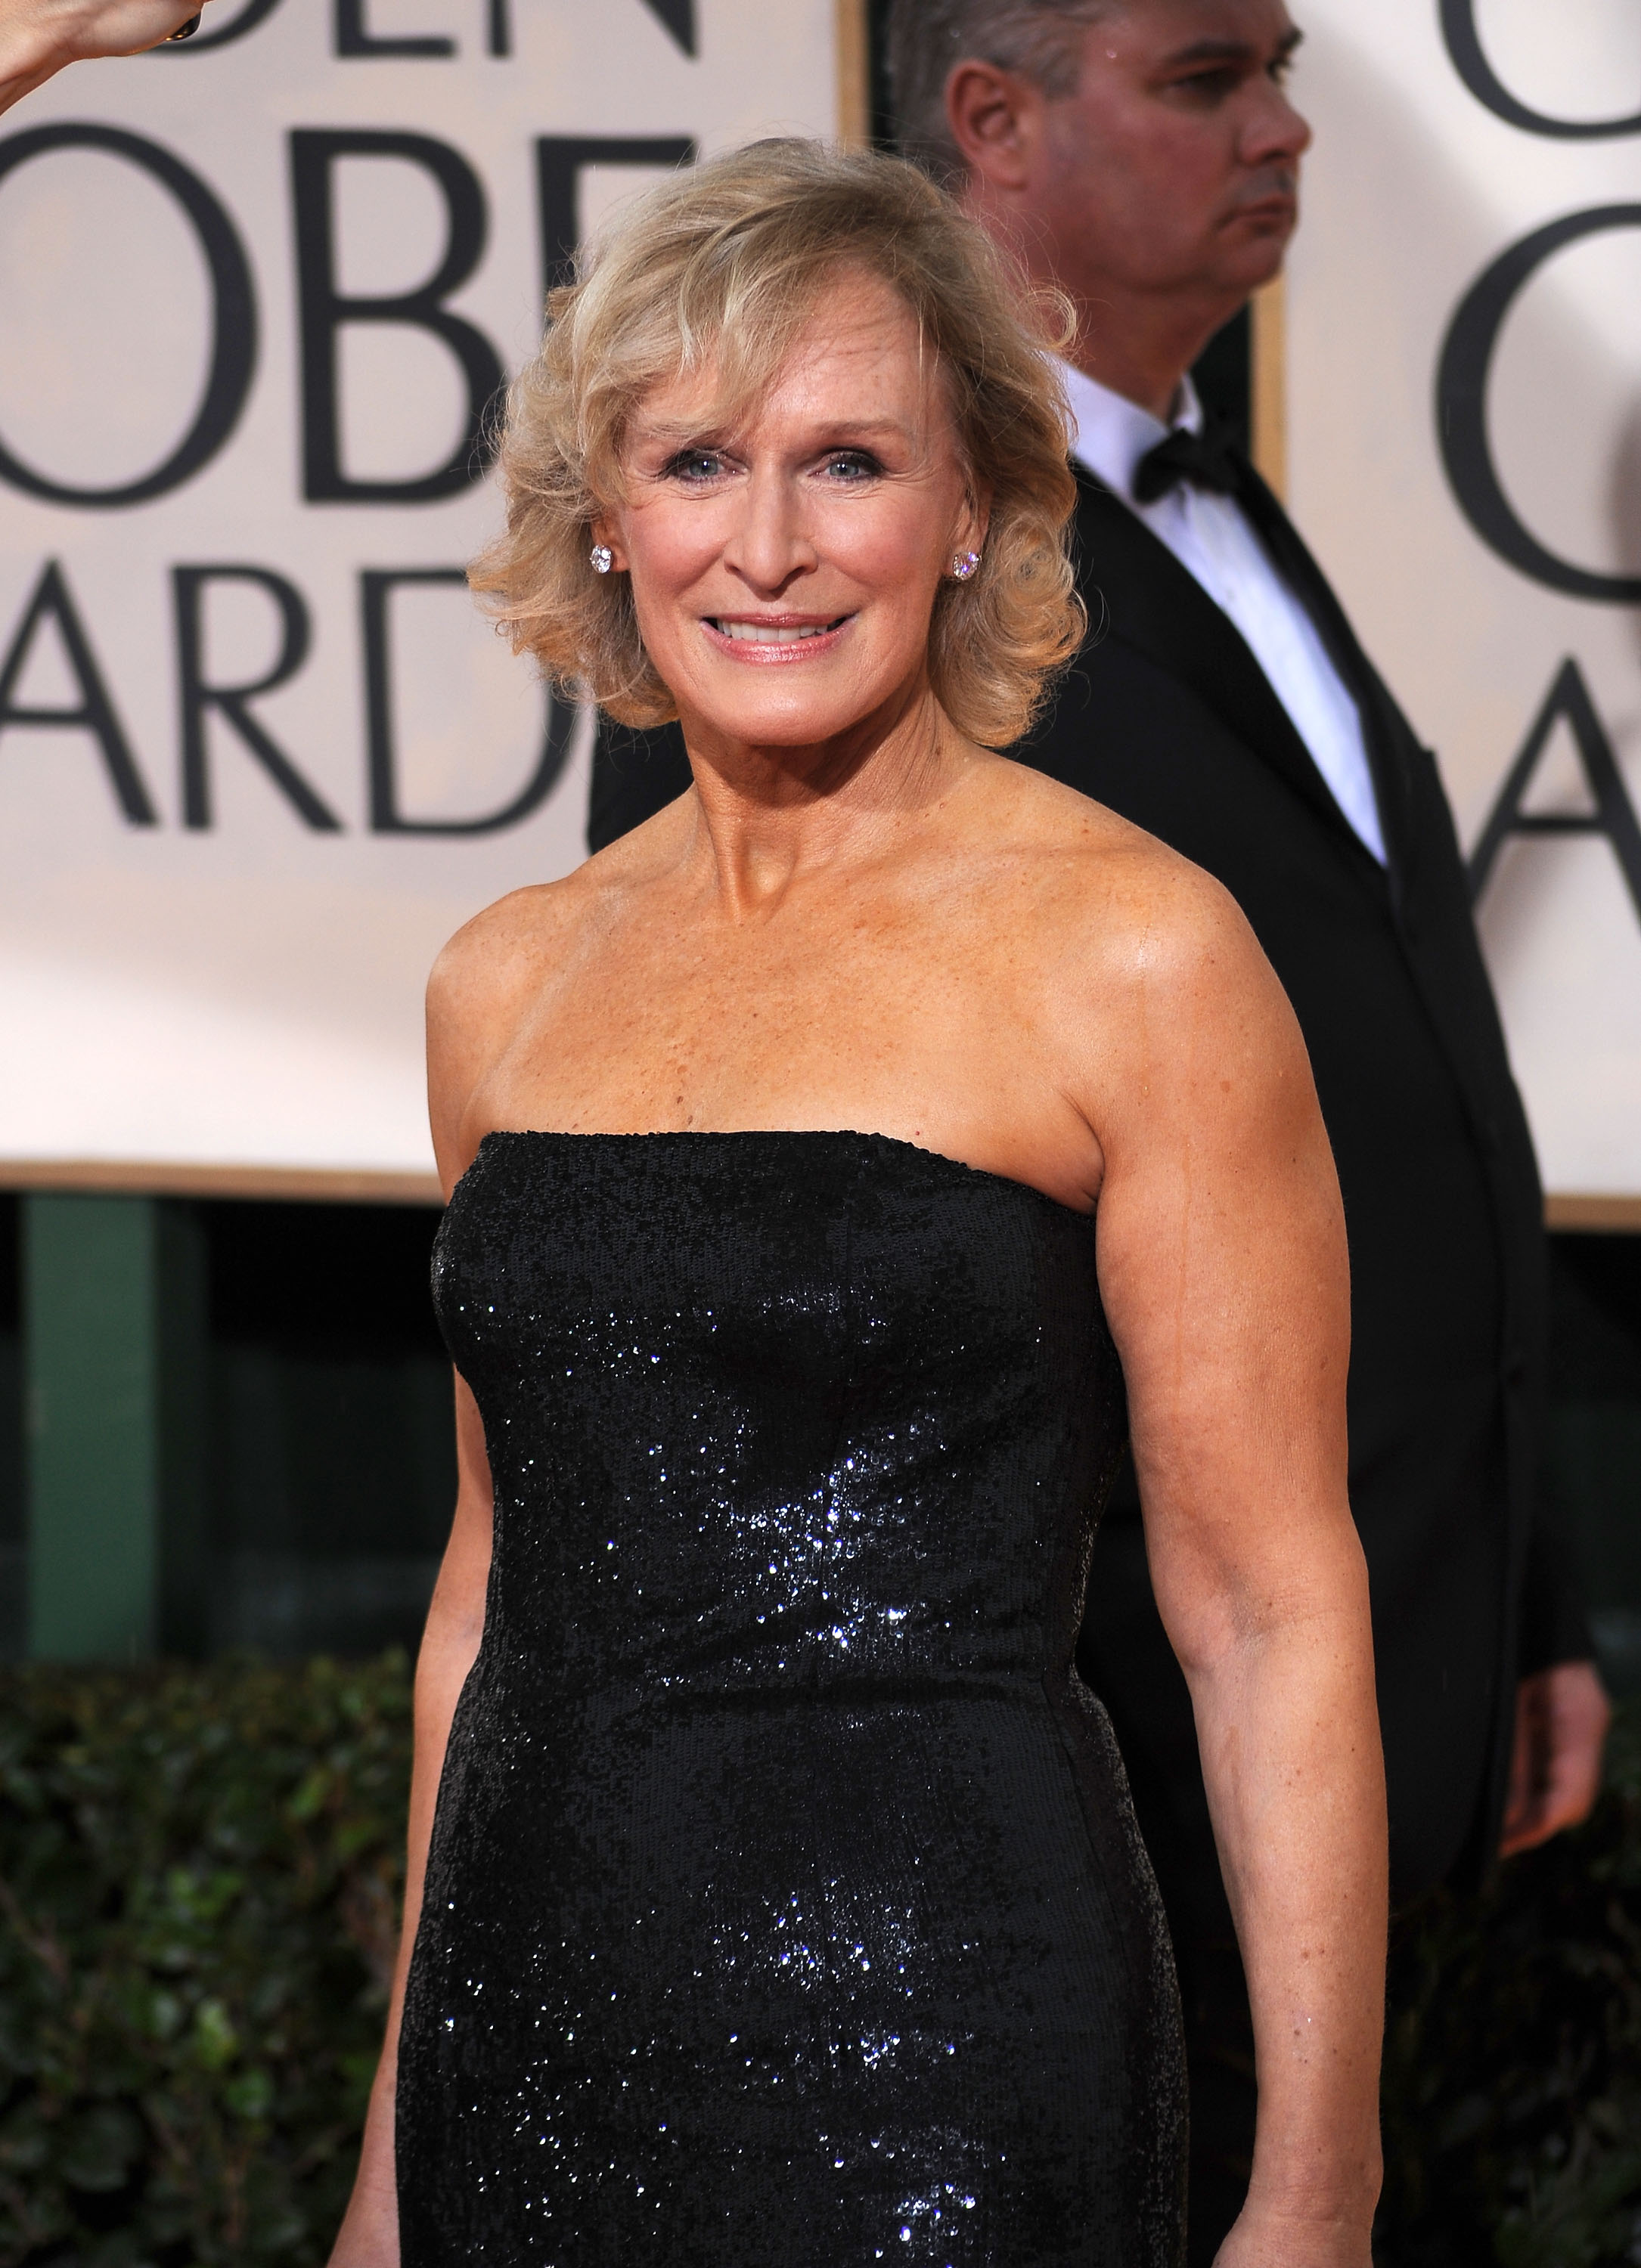 Glenn Close attends the 67th Annual Golden Globe Awards on January 17, 2010 in Beverly Hills, California| Source: Getty Images